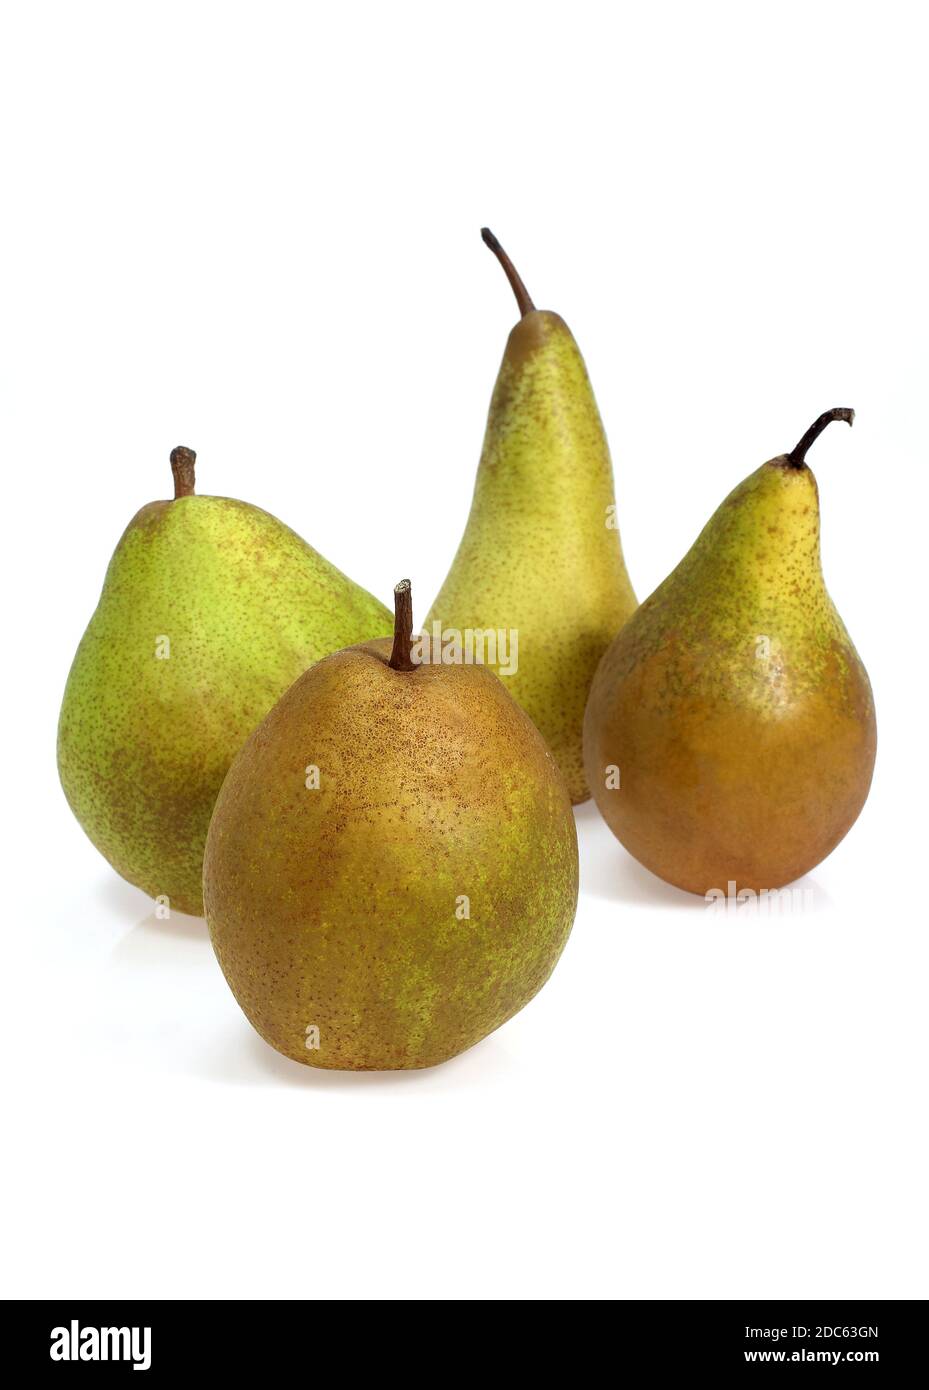 BEURRE HARDY, COMICE, WILLIAMS AND CONFERENCE PEARS Stock Photo